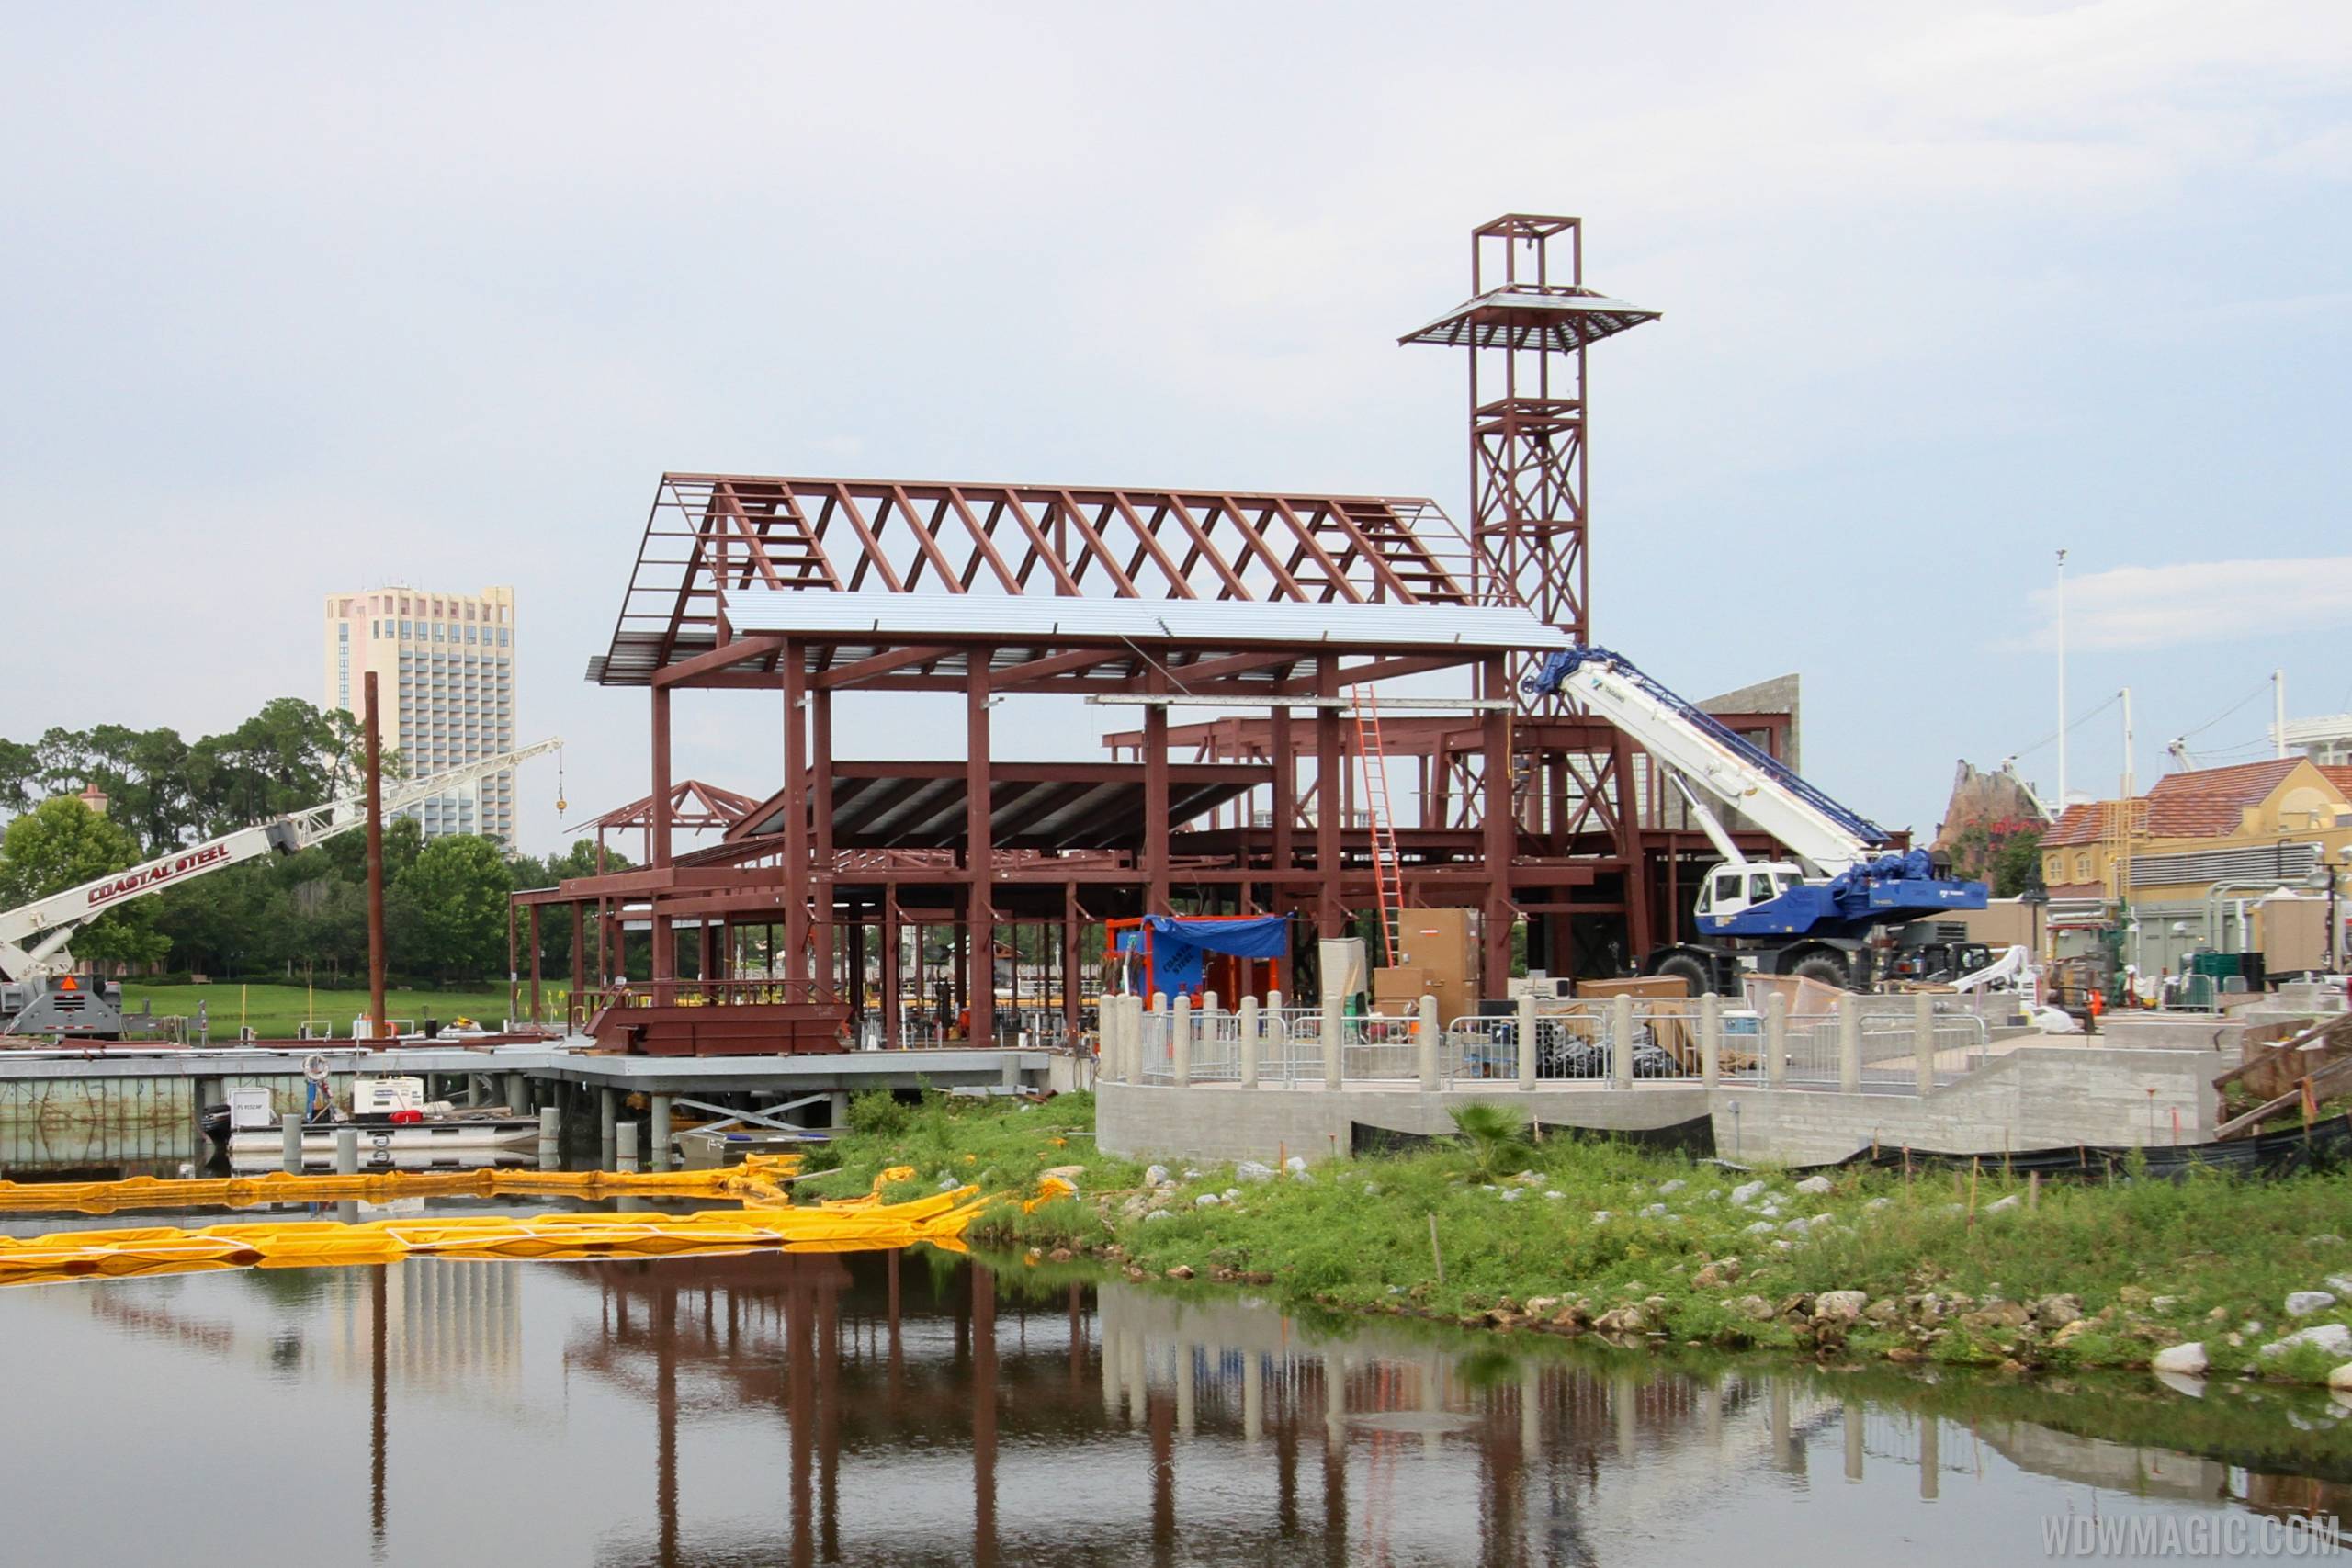 The Boathouse construction